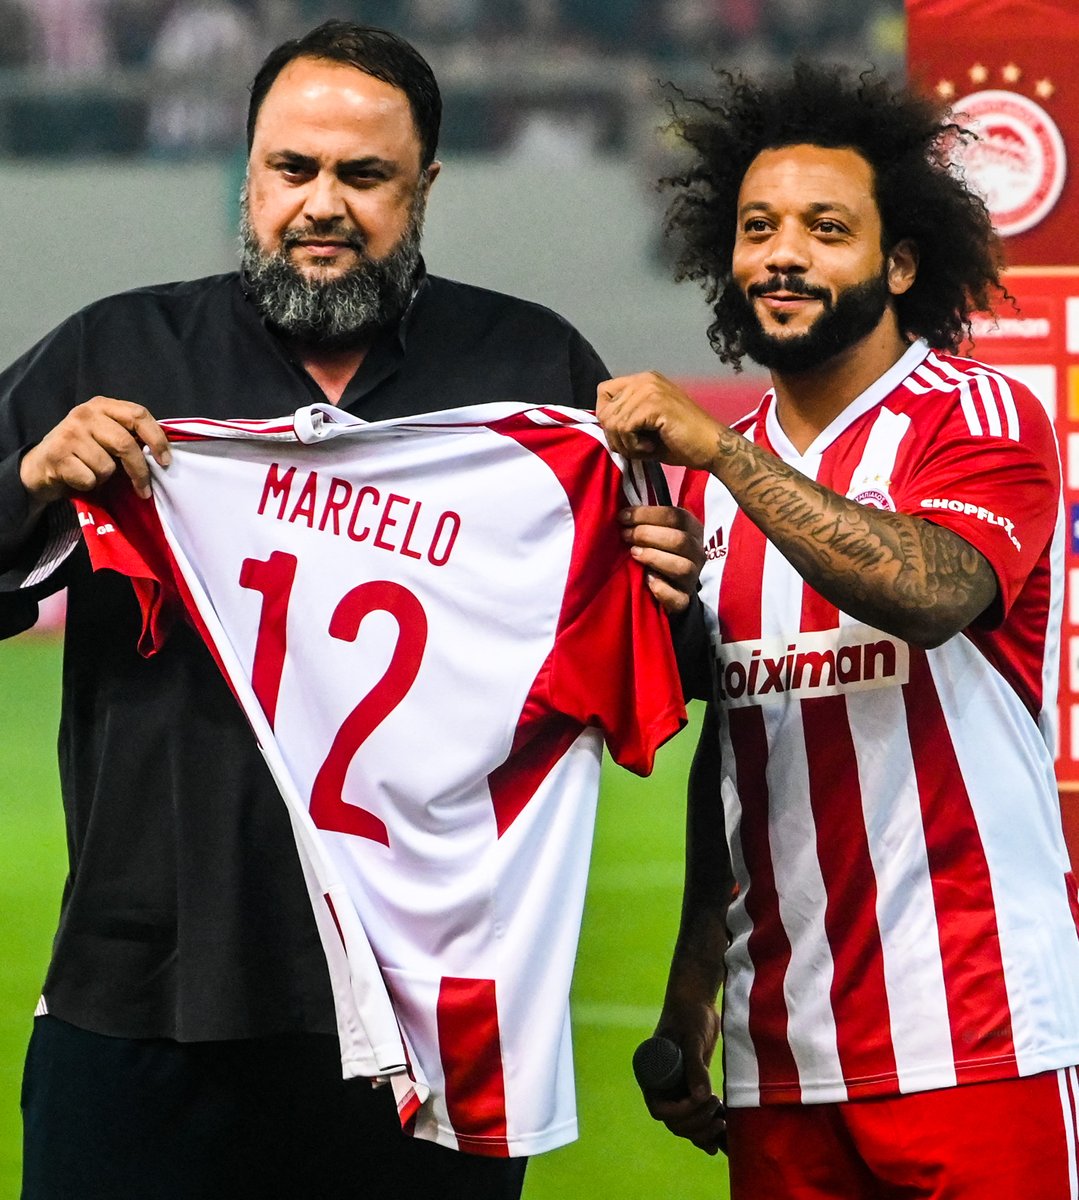 🇧🇷 Marcelo being unveiled at Olympiacos 🔴⚪️

#UEL https://t.co/I094e6fviR